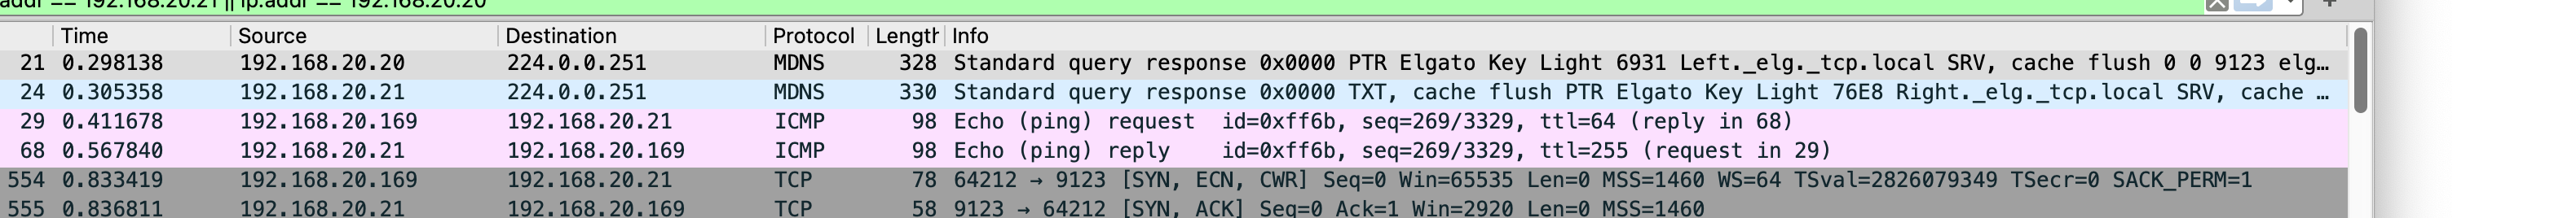 Screenshot of Wireshark showing the Elgato key light products exchanging multicast DNS messages